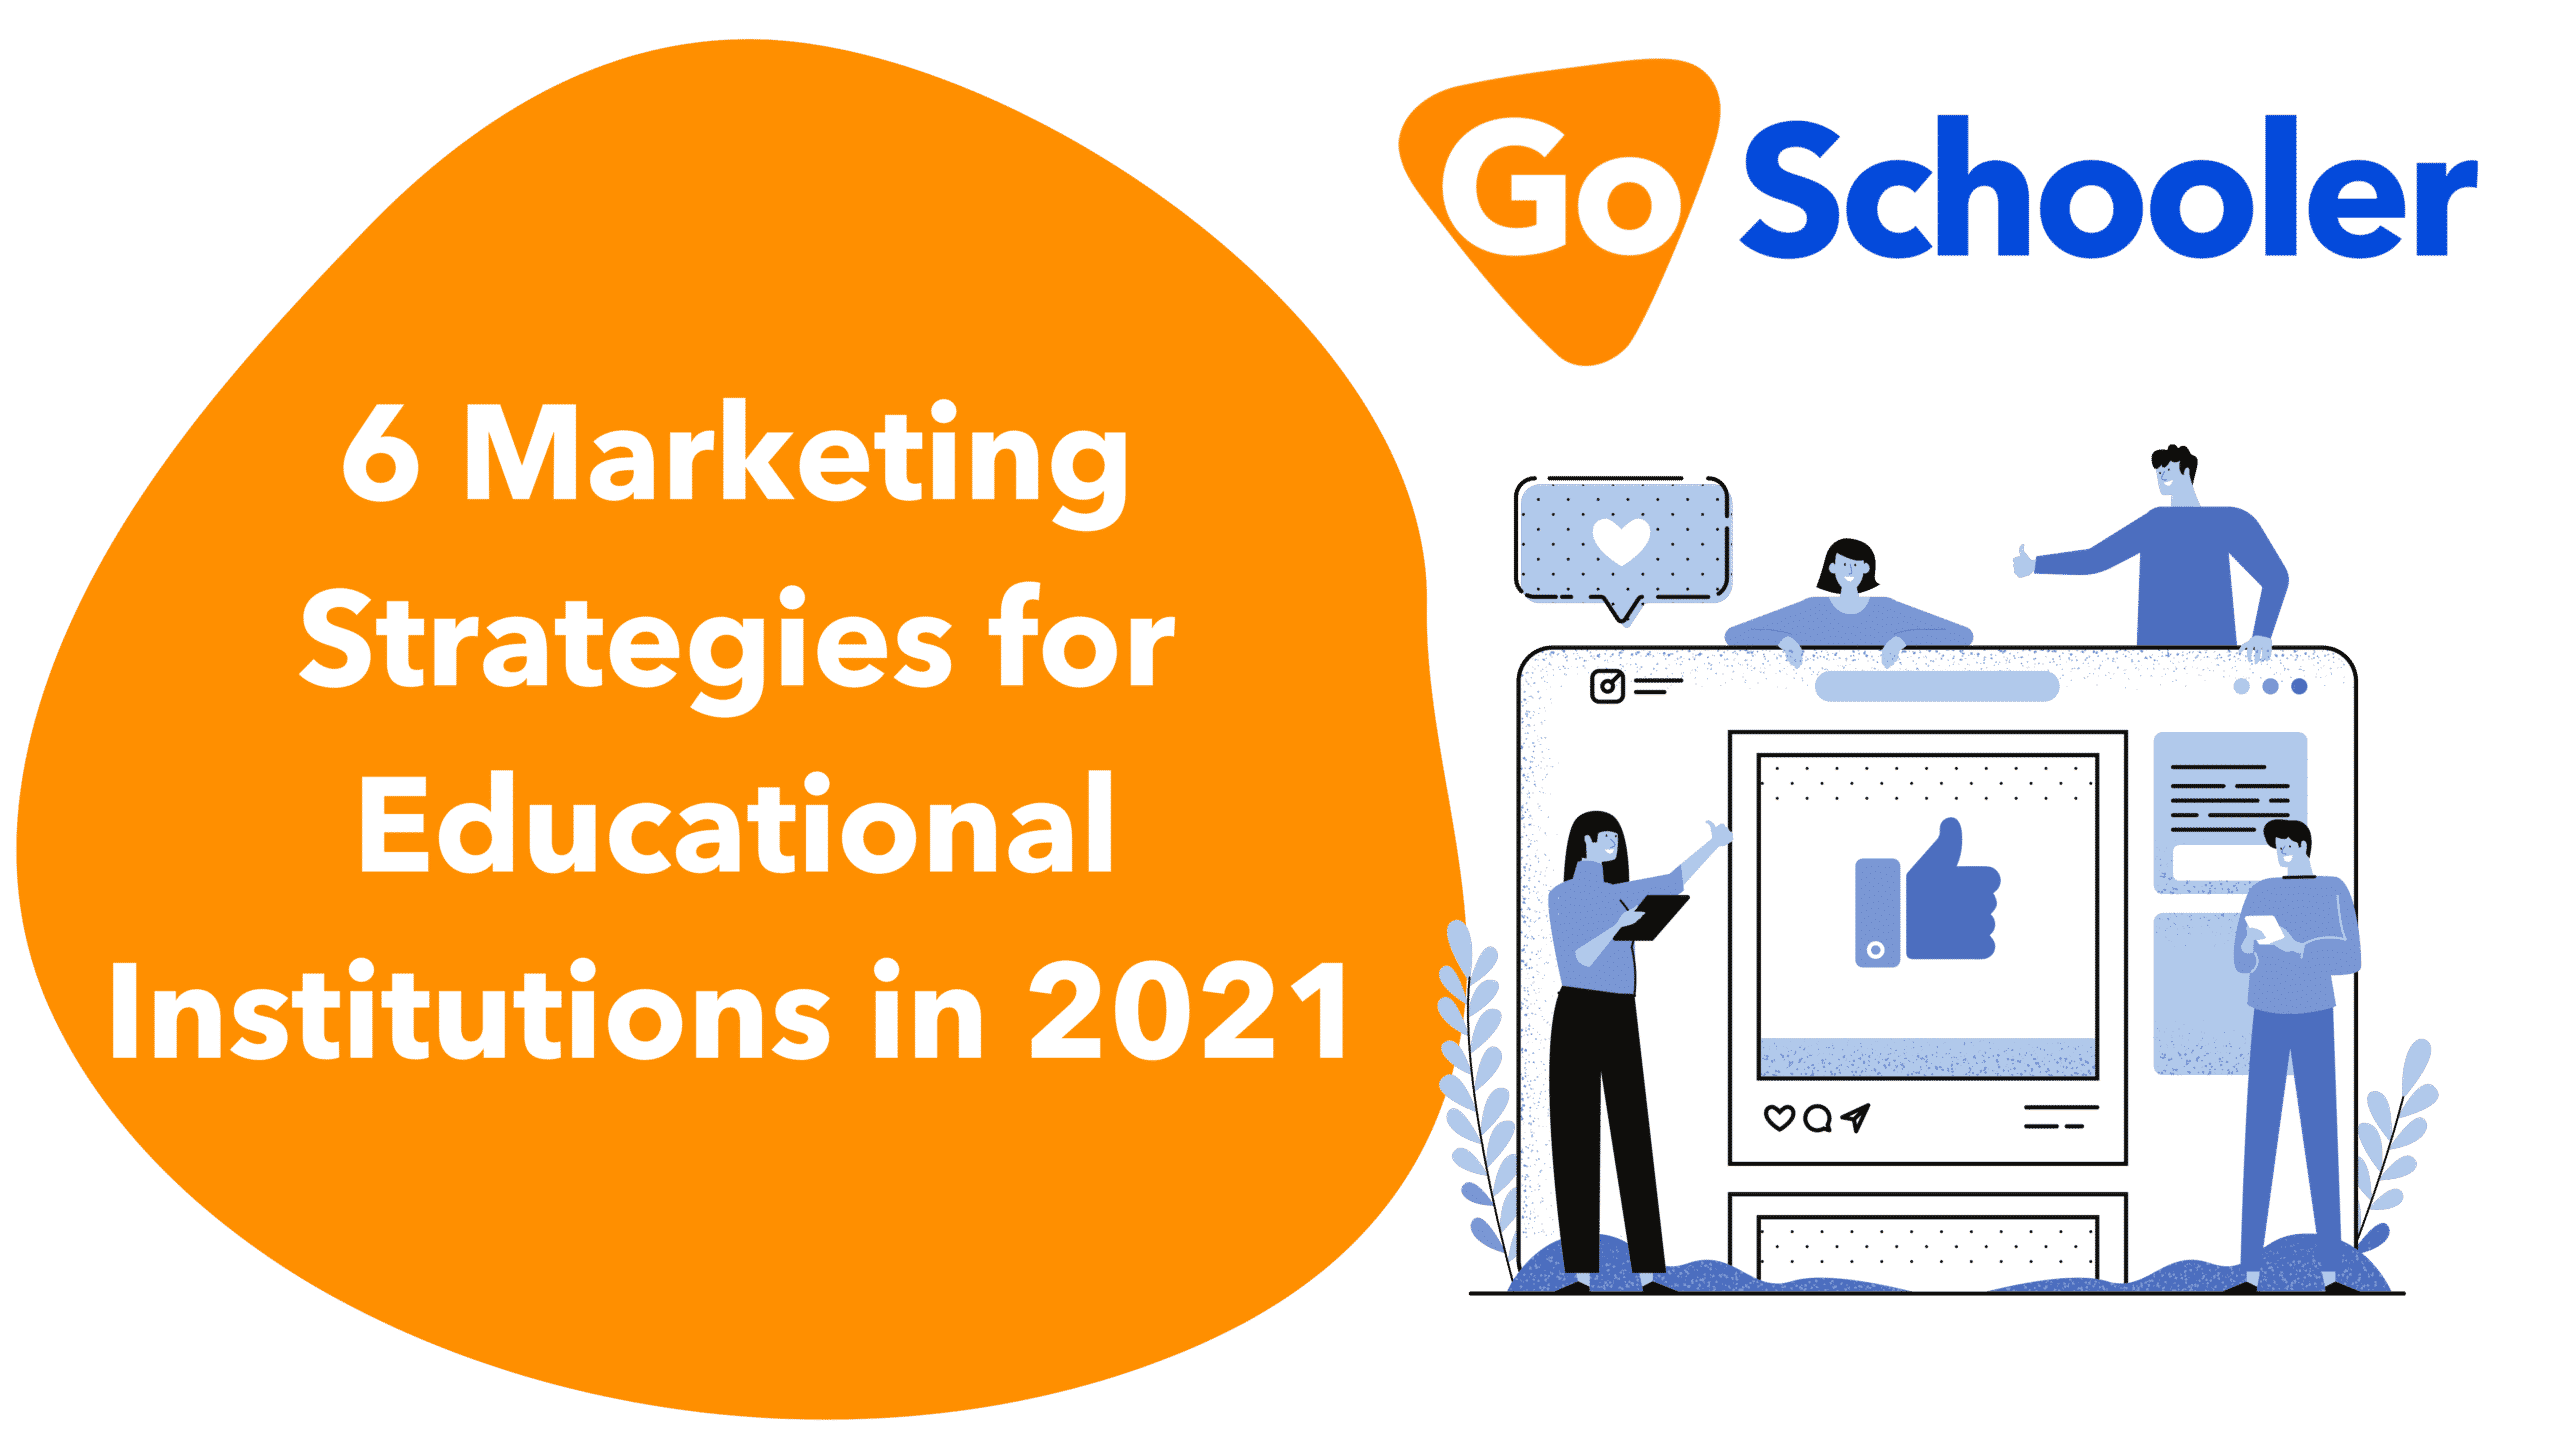 Marketing Strategies for Educational Institutions